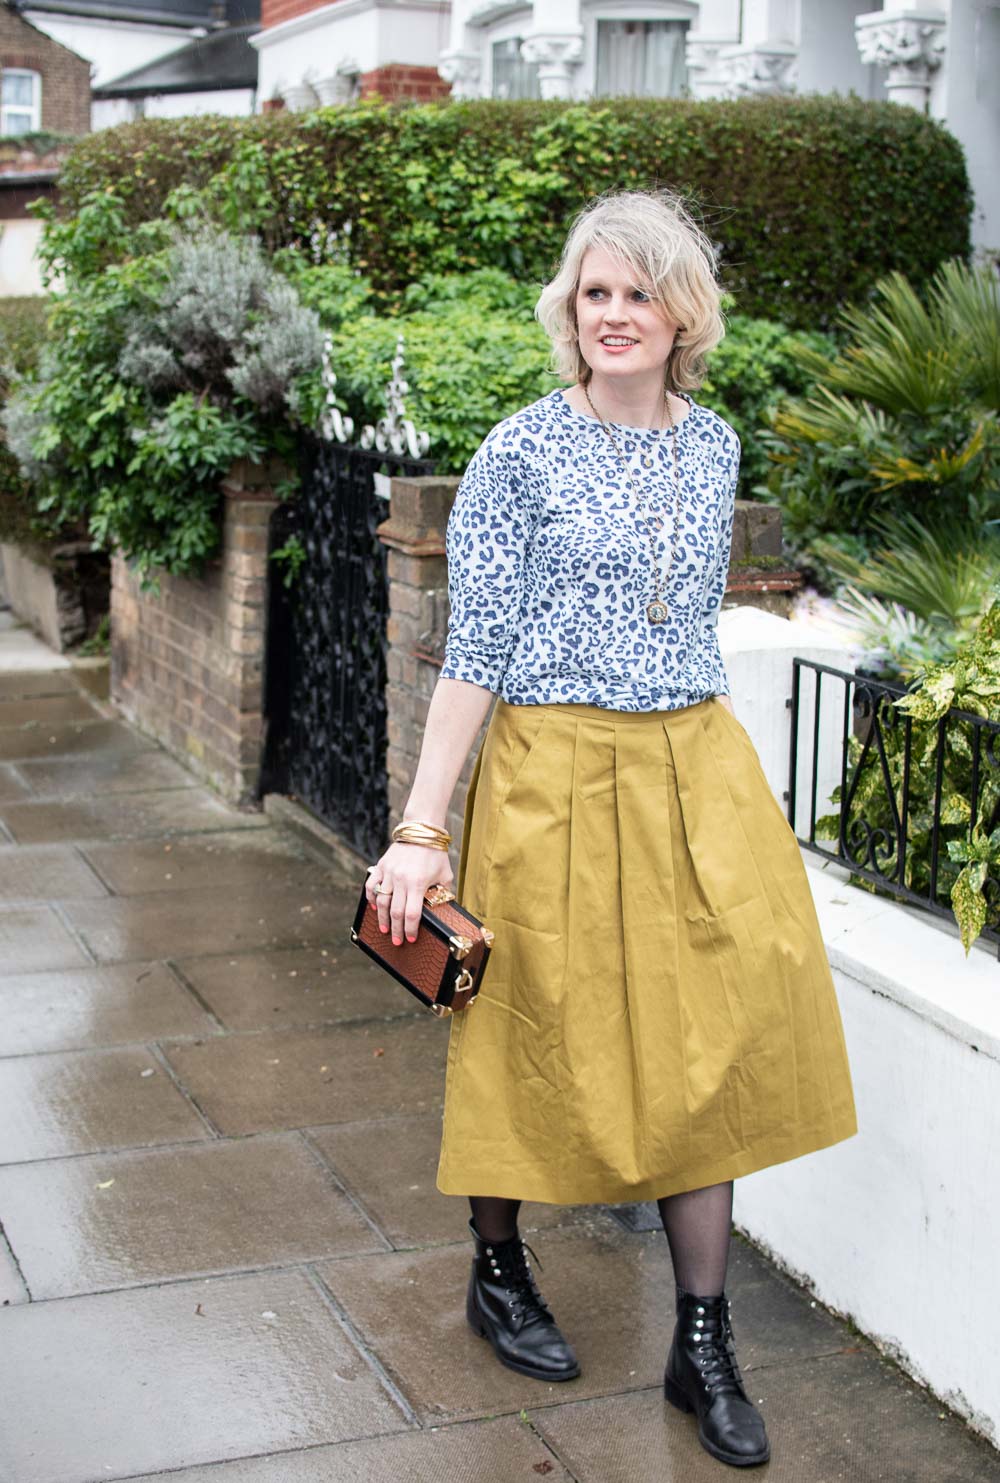 Karen Maurice of n4mummy wears leopard print top and yellow skirt both from Oxfam, carrying a Katherena bag